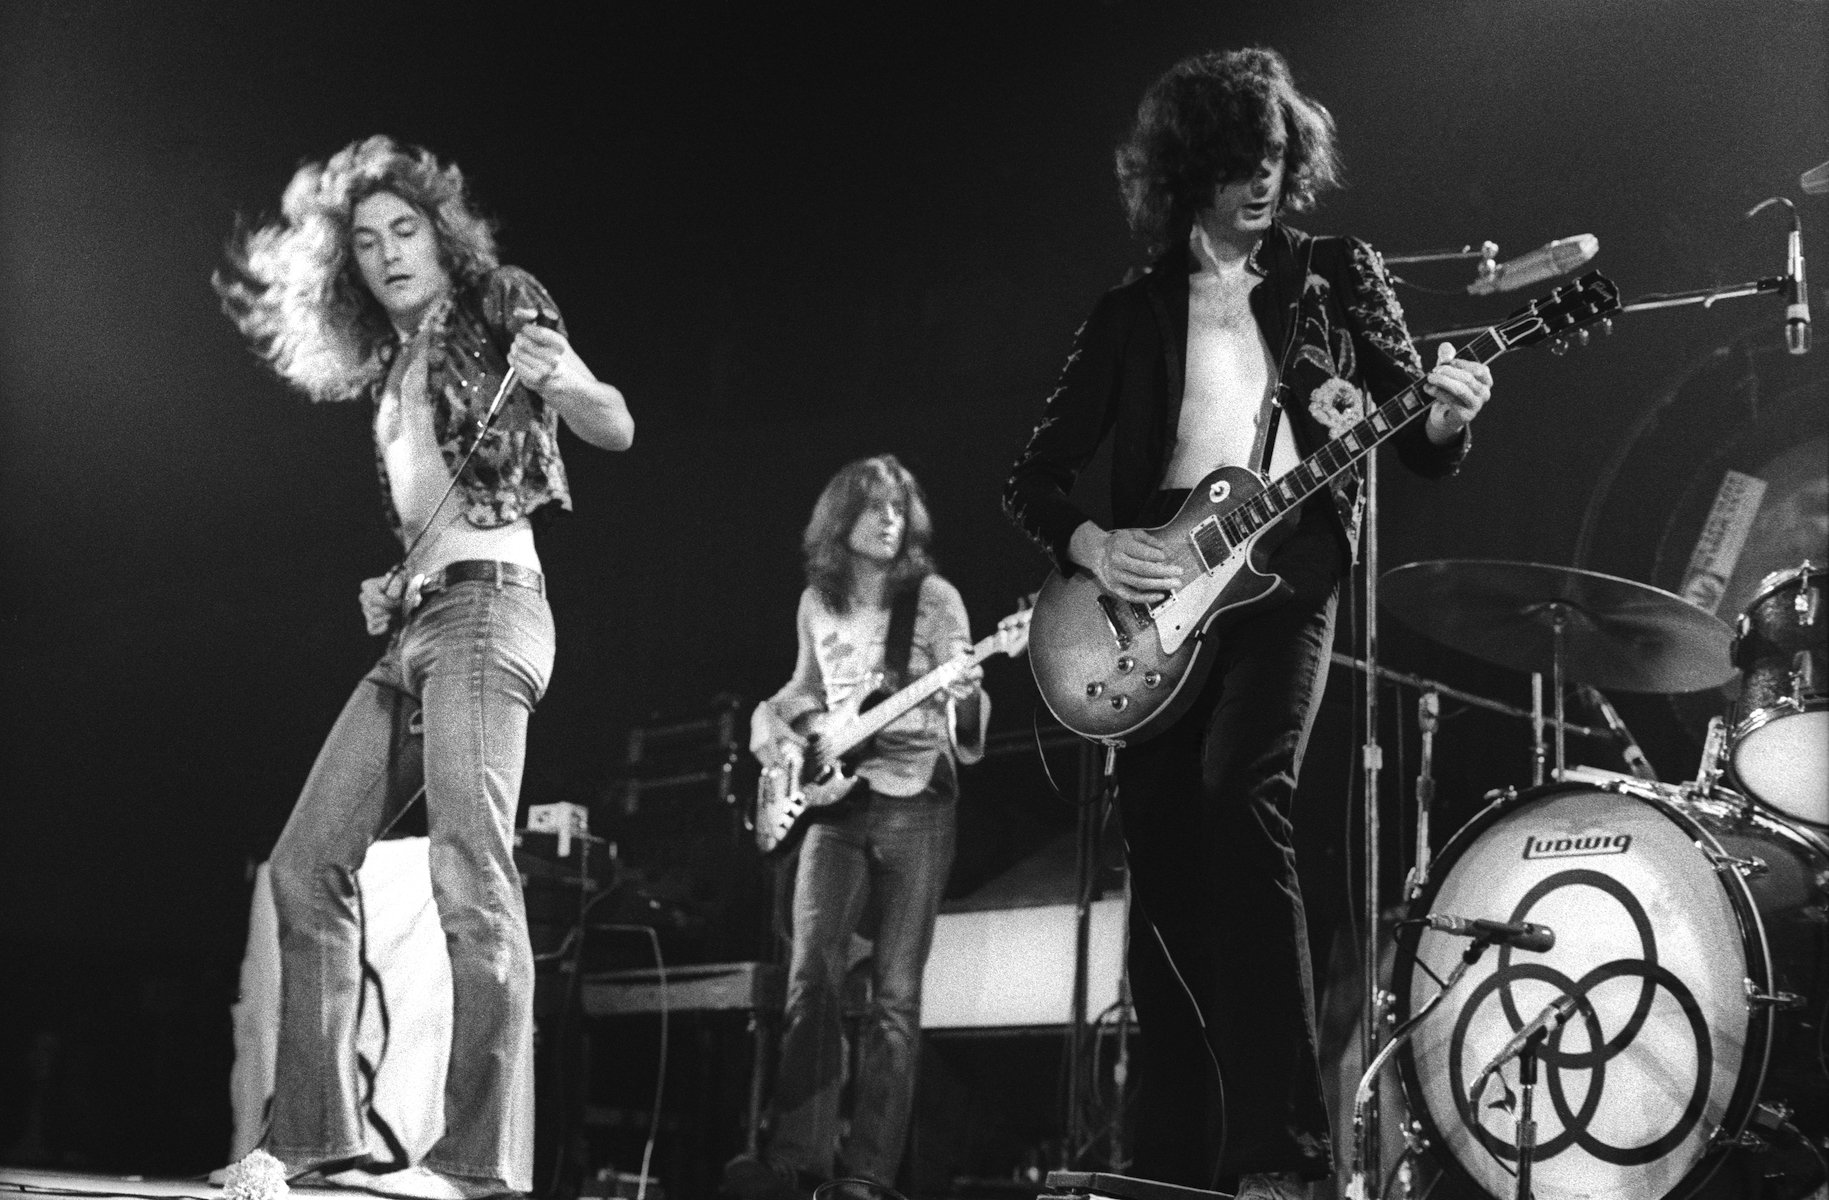 Led Zeppelin plays onstage at The Forum in 1973